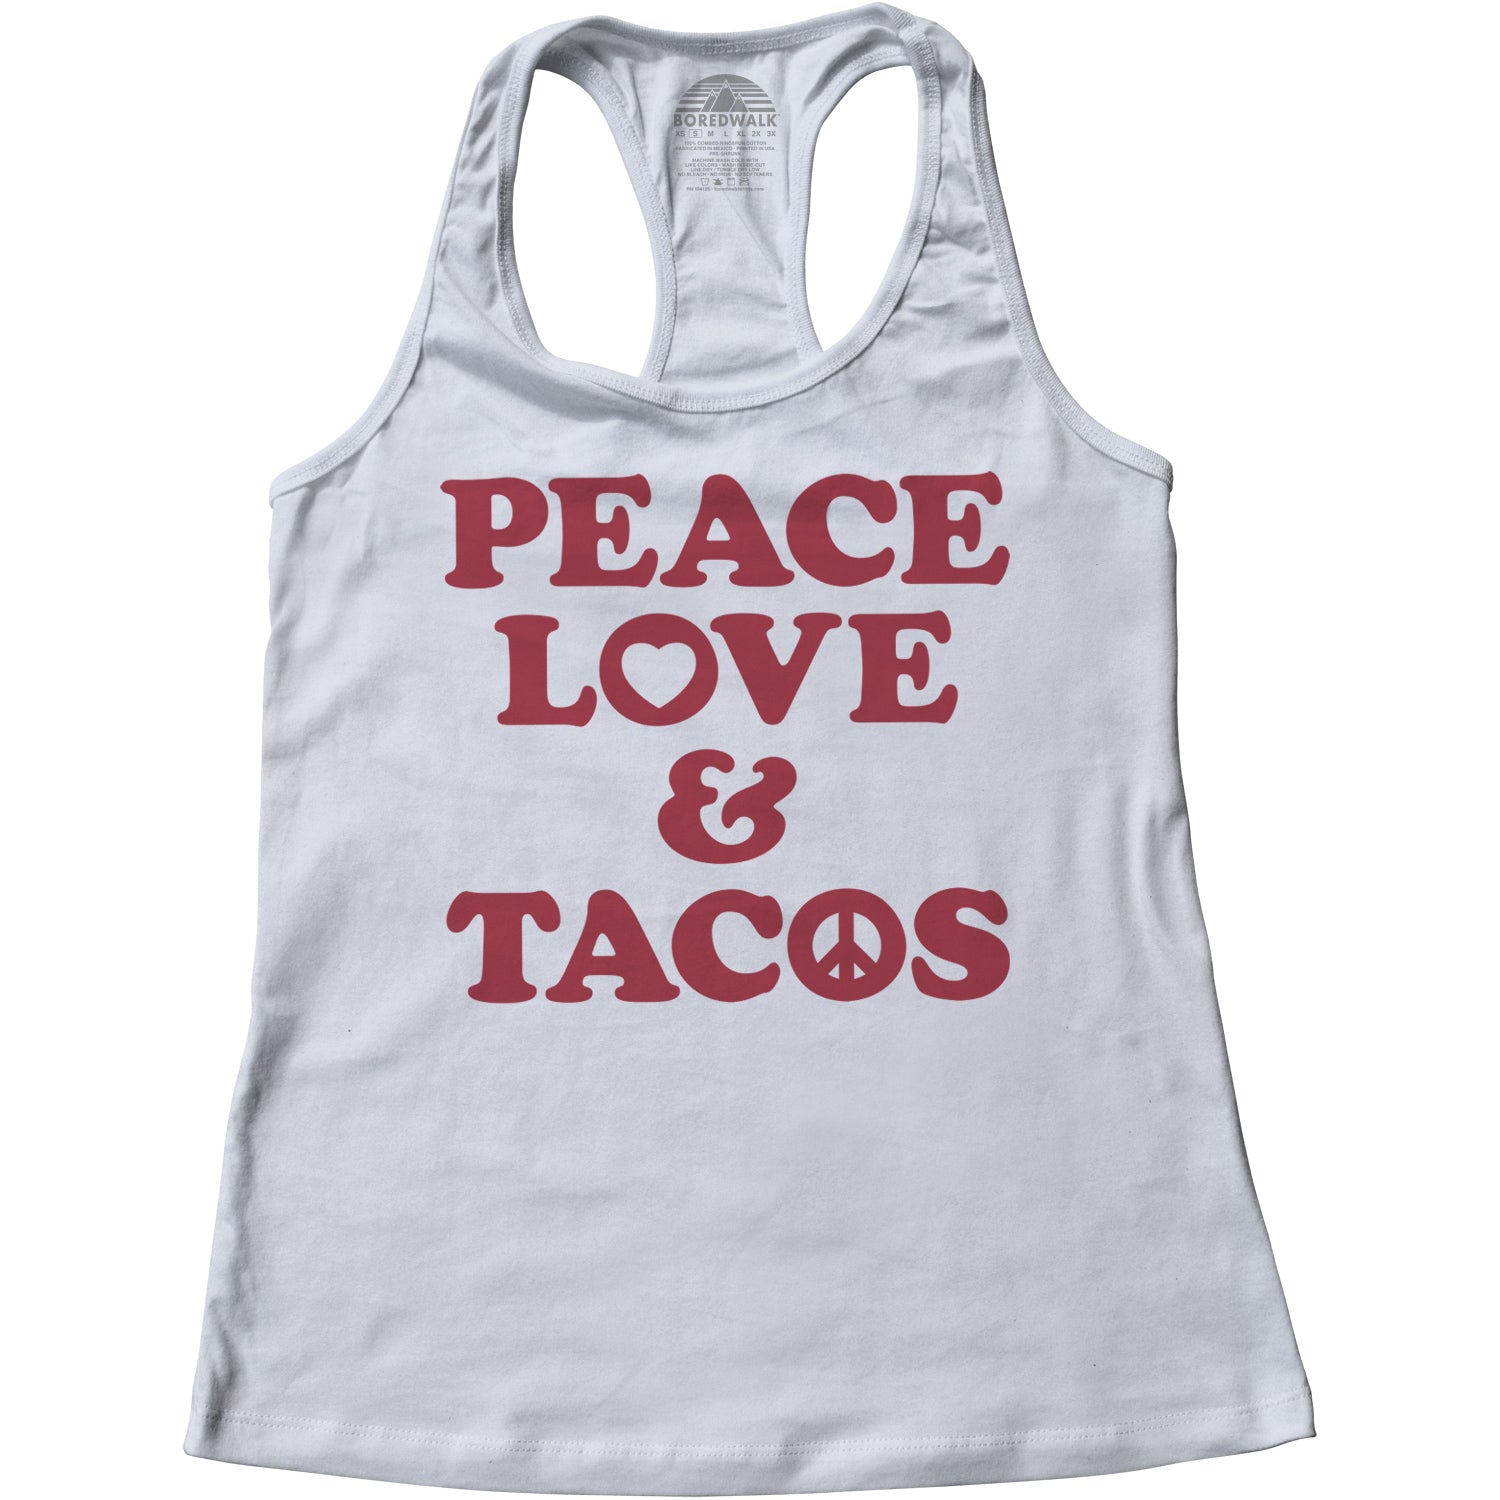 Women's Peace Love and Tacos Racerback Tank Top